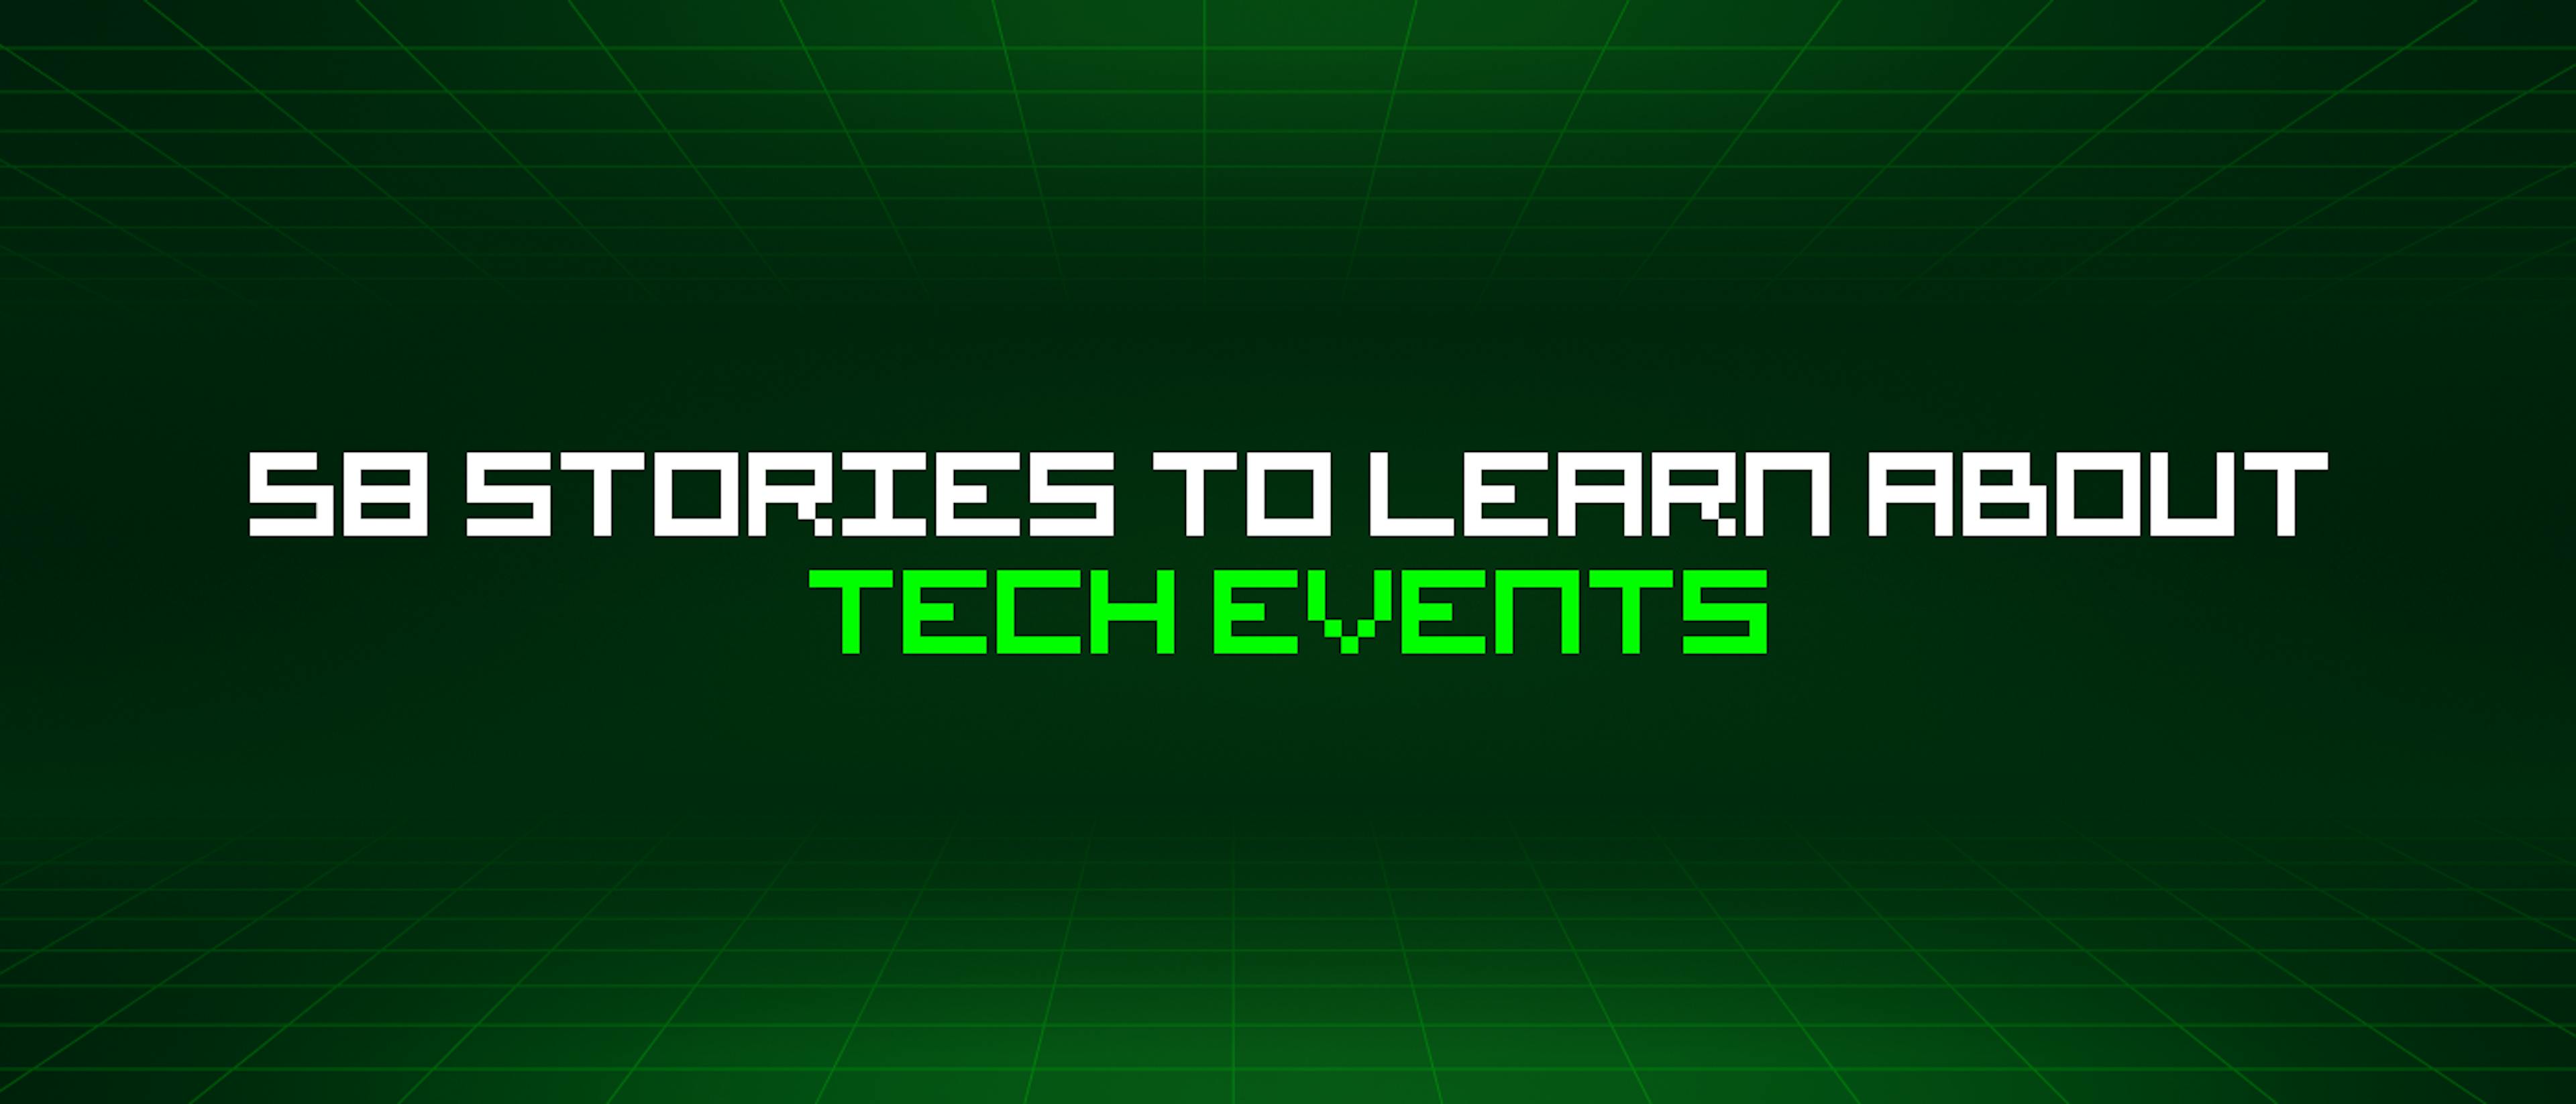 featured image - 58 Stories To Learn About Tech Events